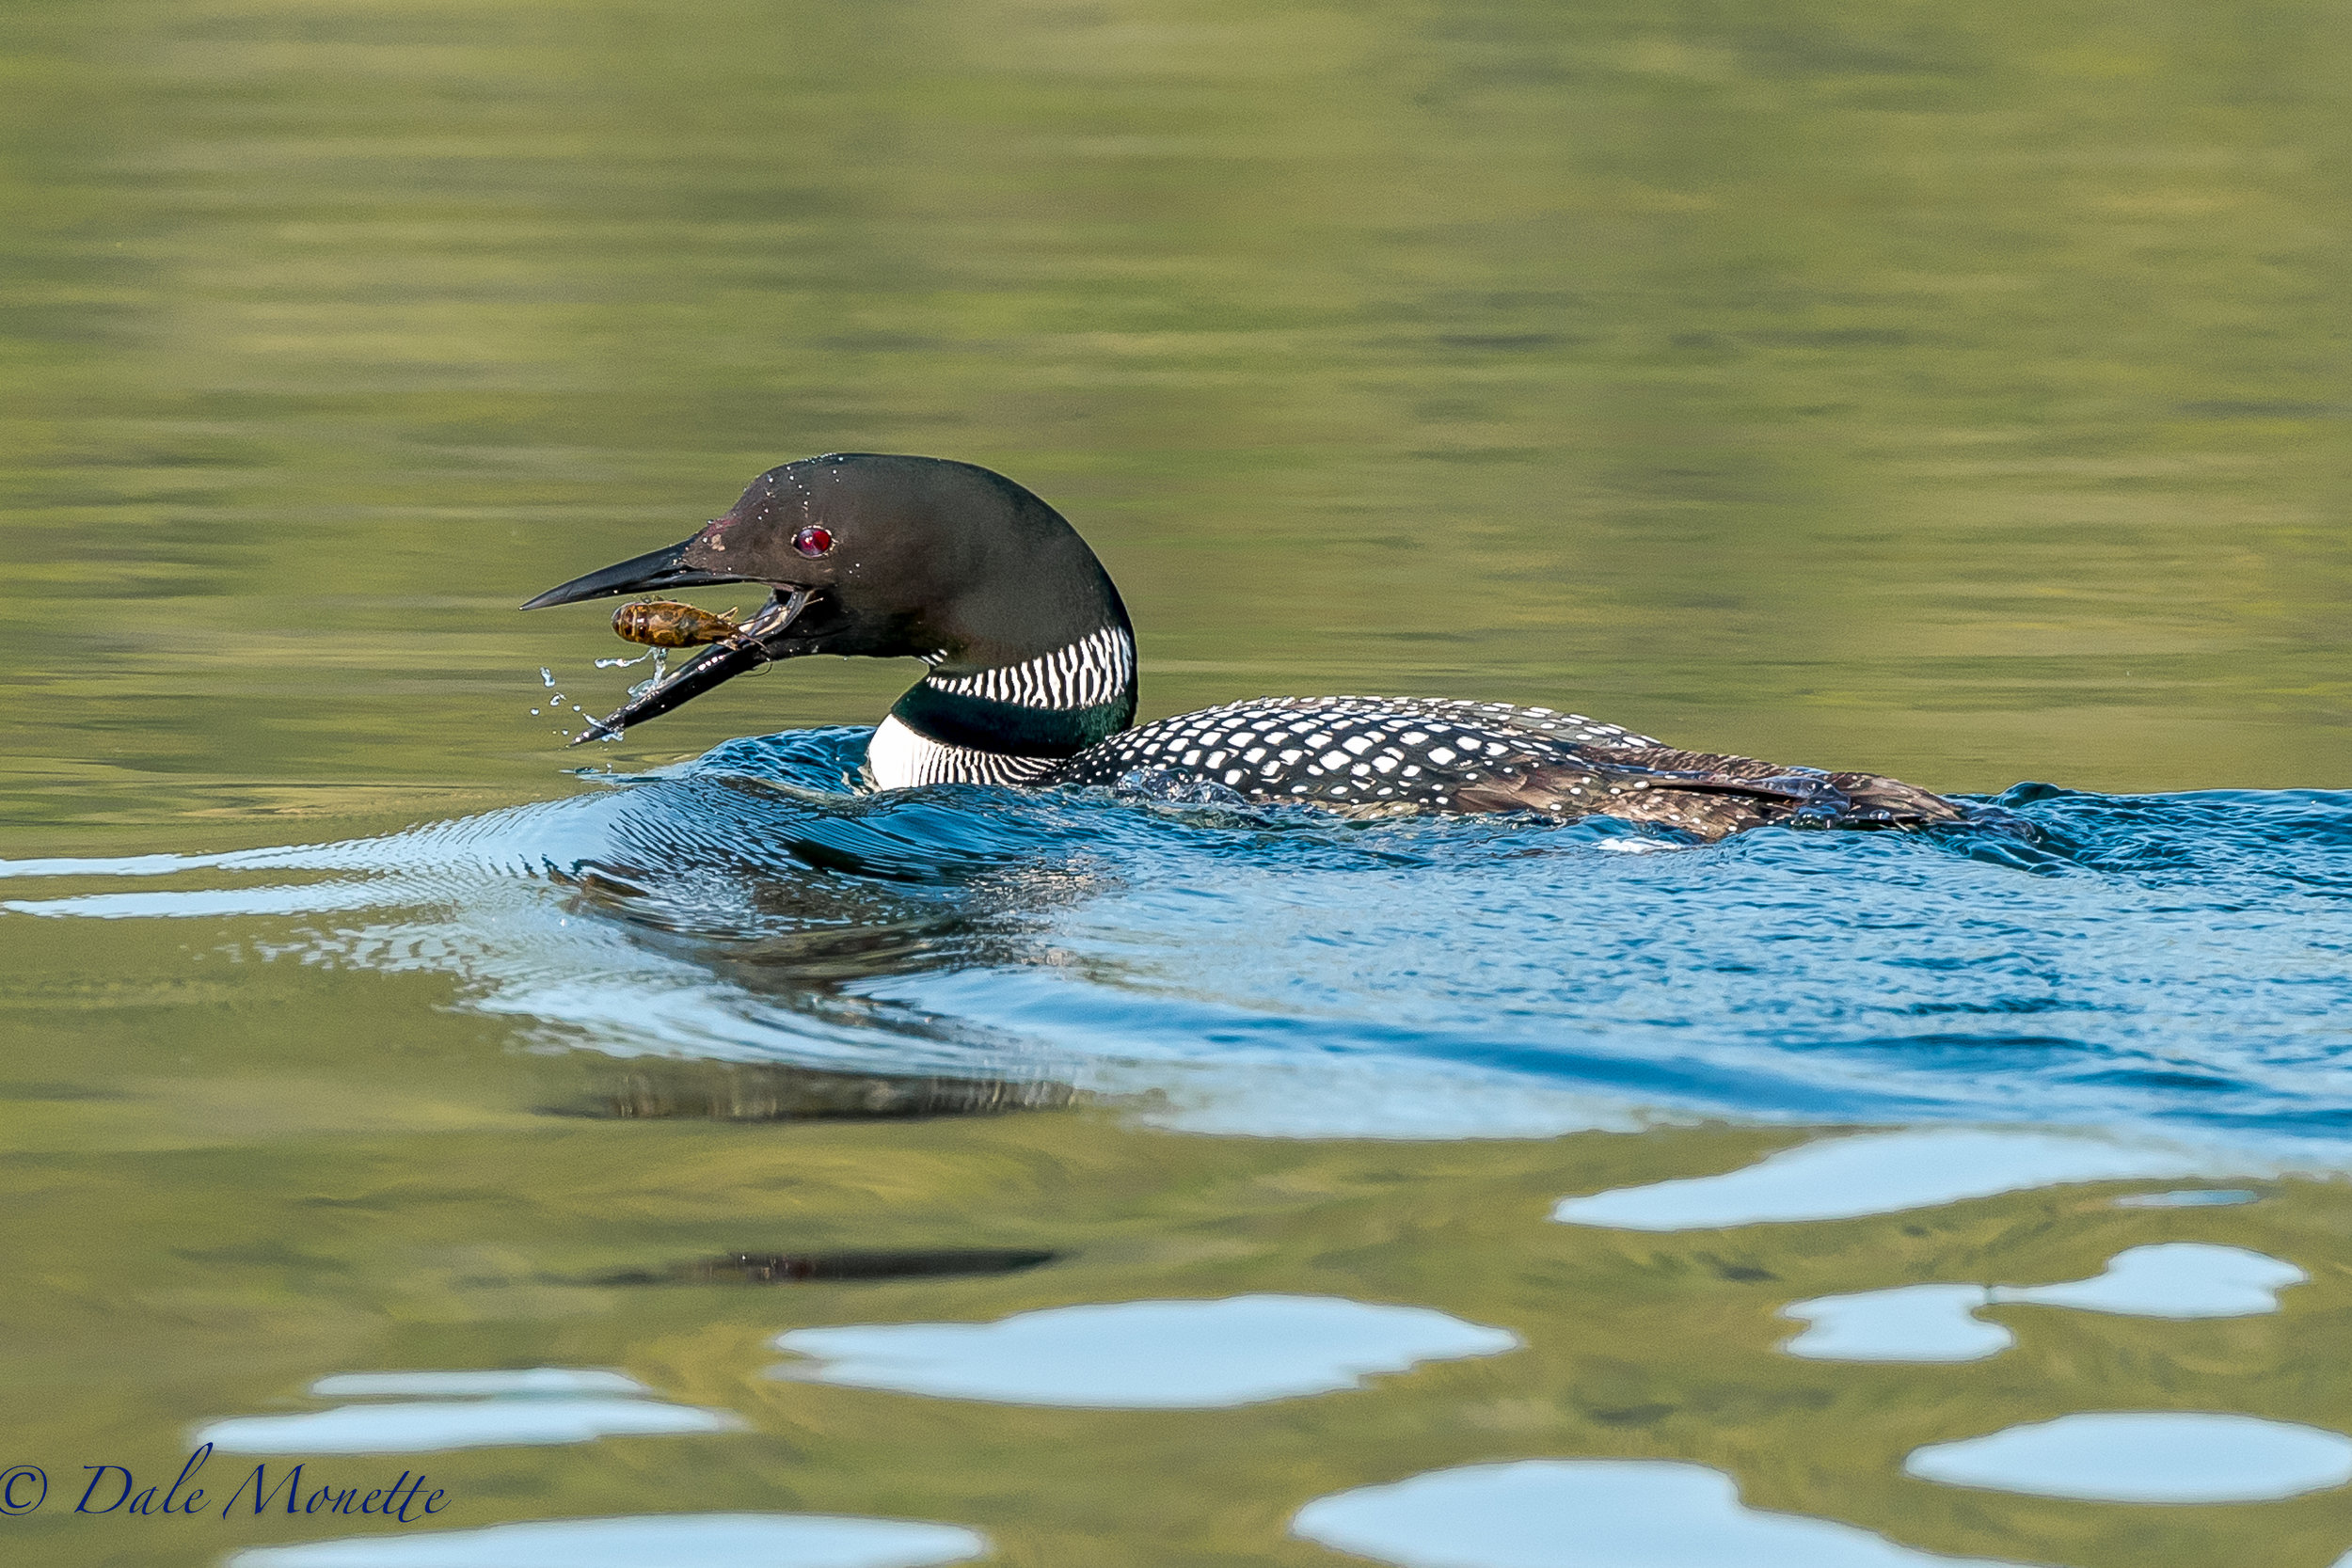   The weekly common loon surveys started today at Quabbin, &nbsp;We found a group of 8 loons and this loon popped up with his lunch, a crawfish, right in front of us. &nbsp;5/17/17  